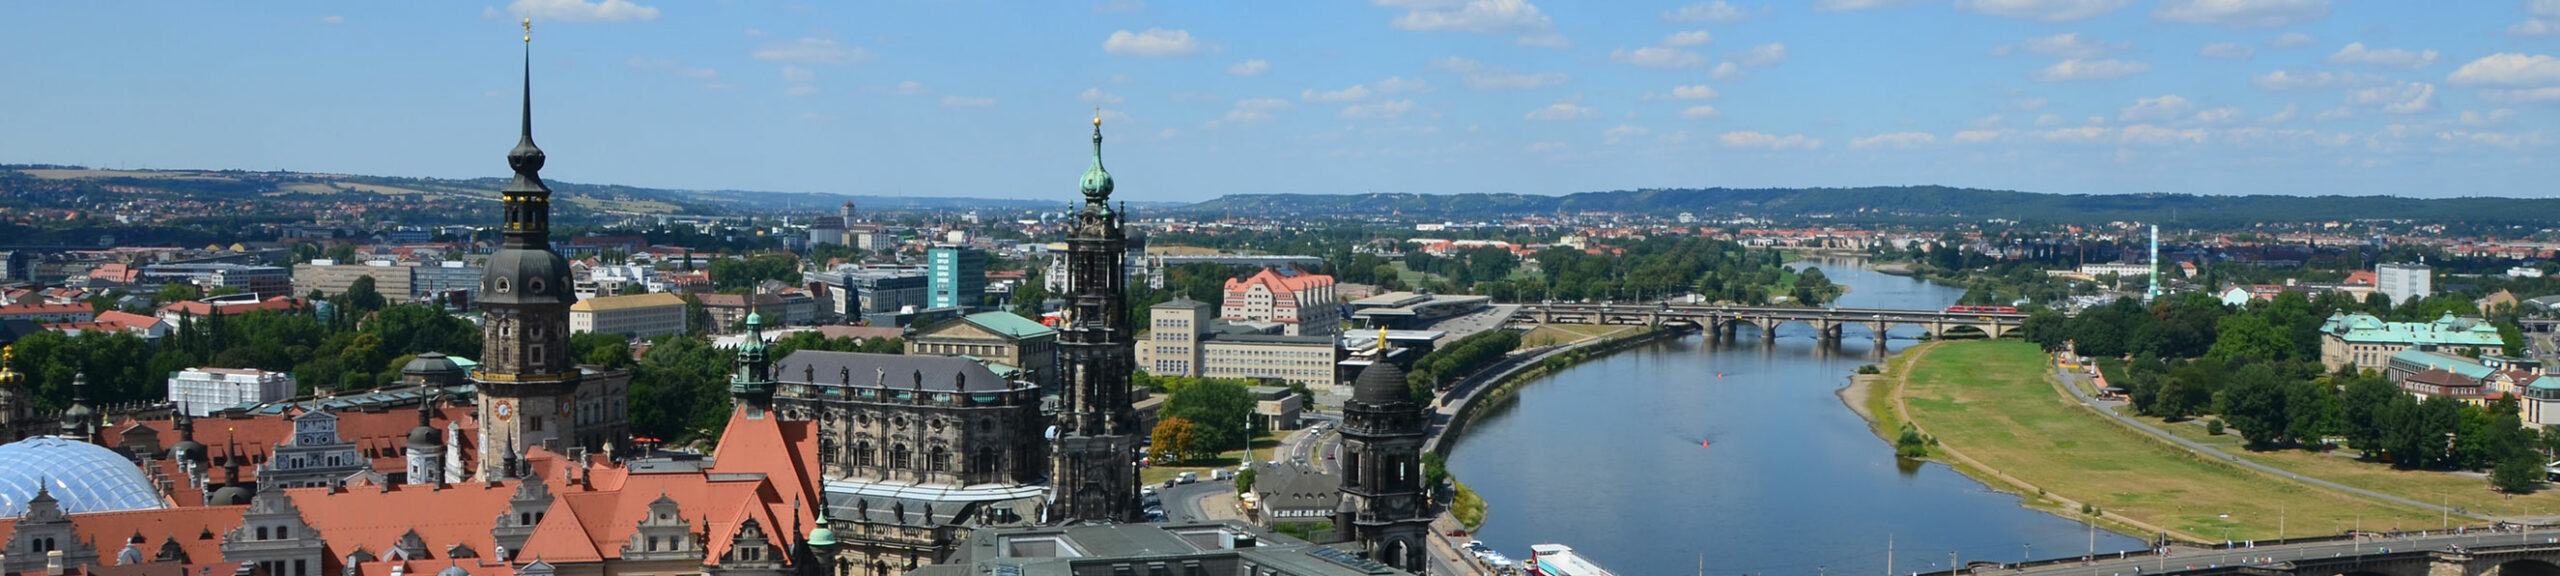 dresden city view from the sky